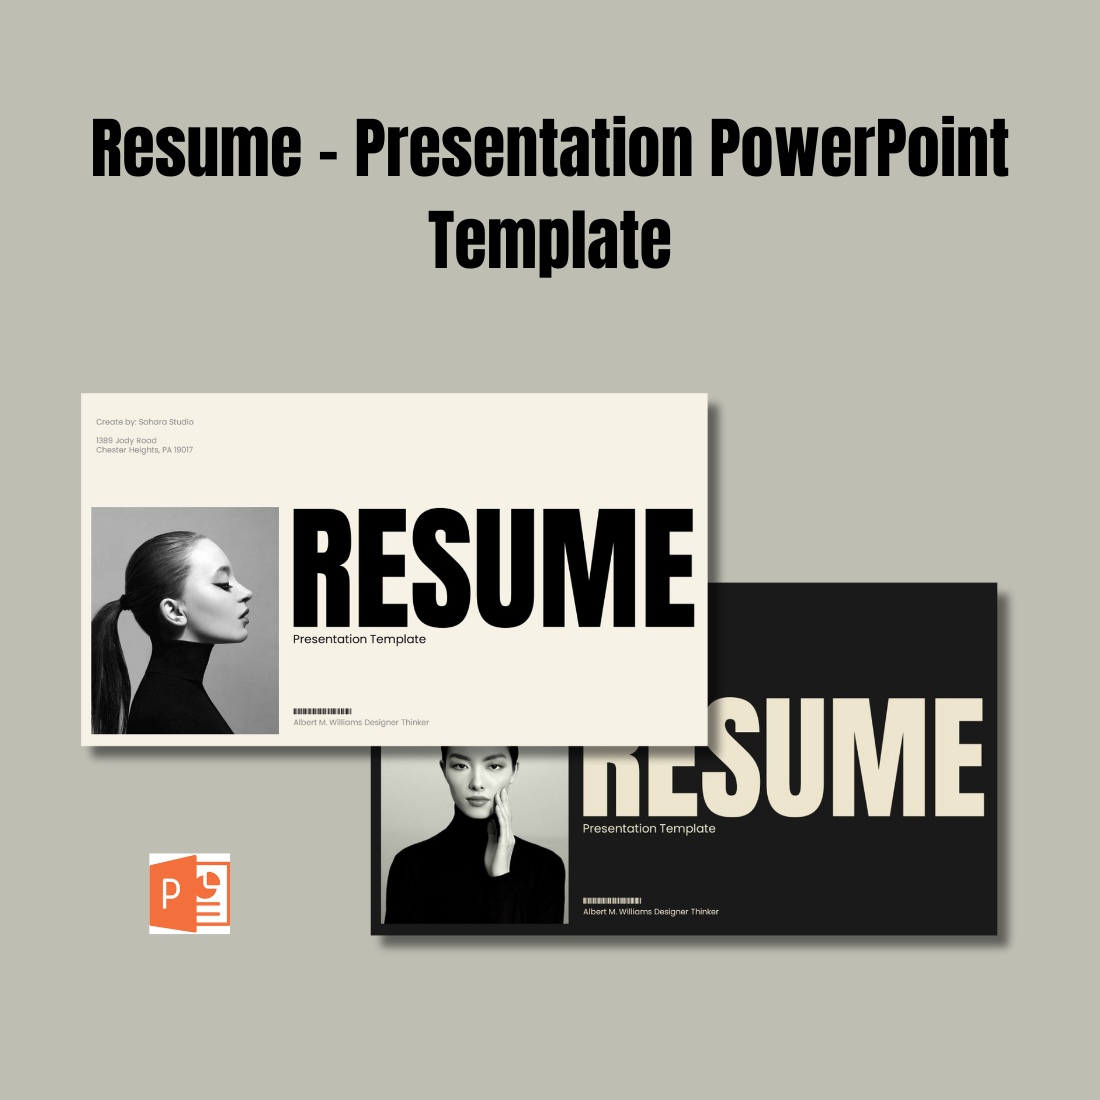 Resume - Presentation PowerPoint Template preview image.